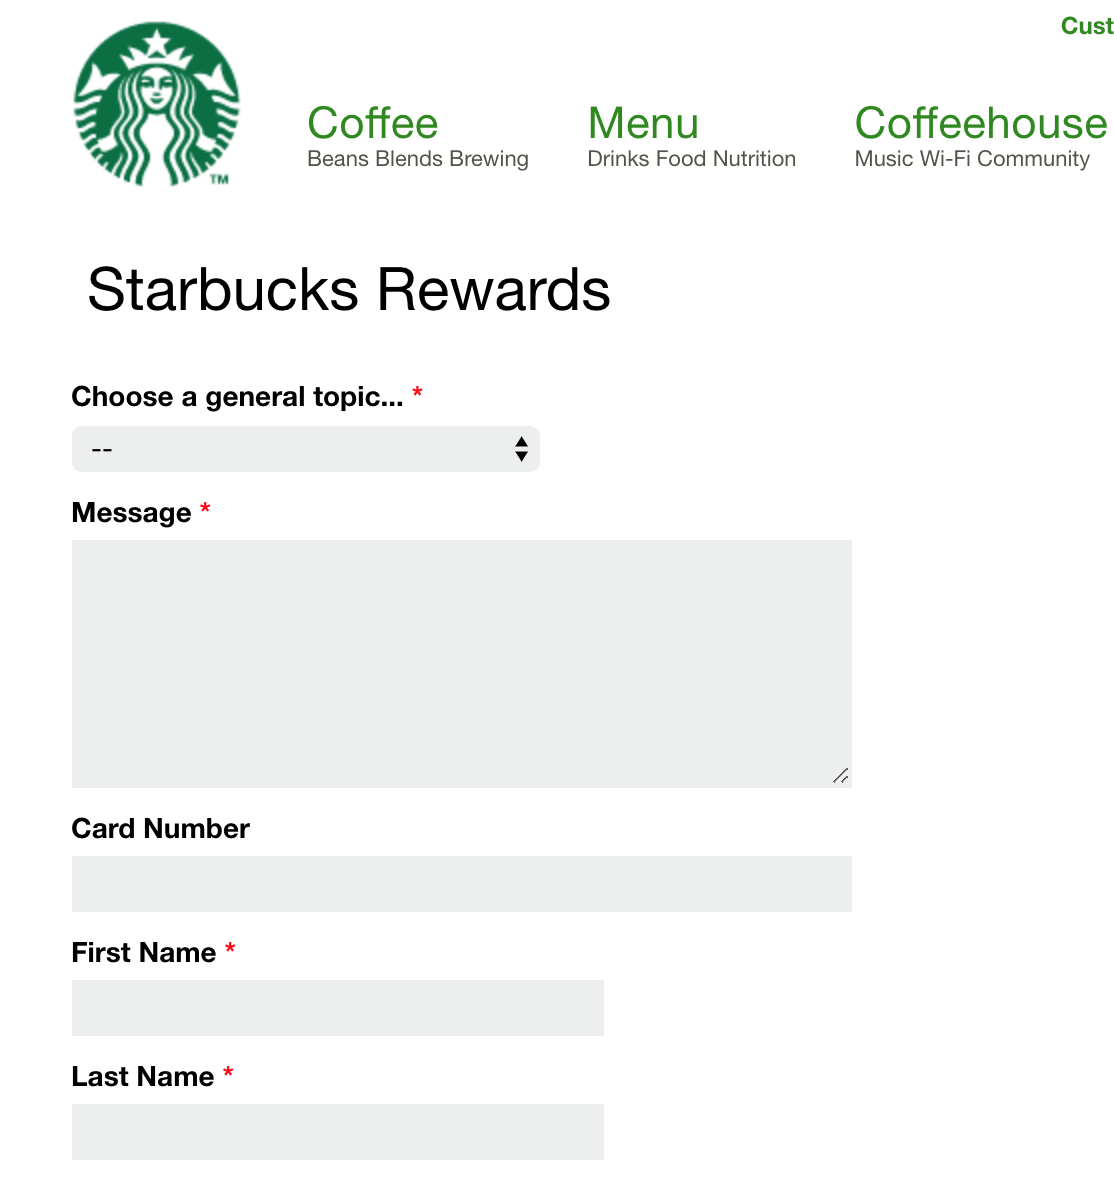 Screenshot of a contact form on the Starbucks website that has separate fields for First Name and Last Name